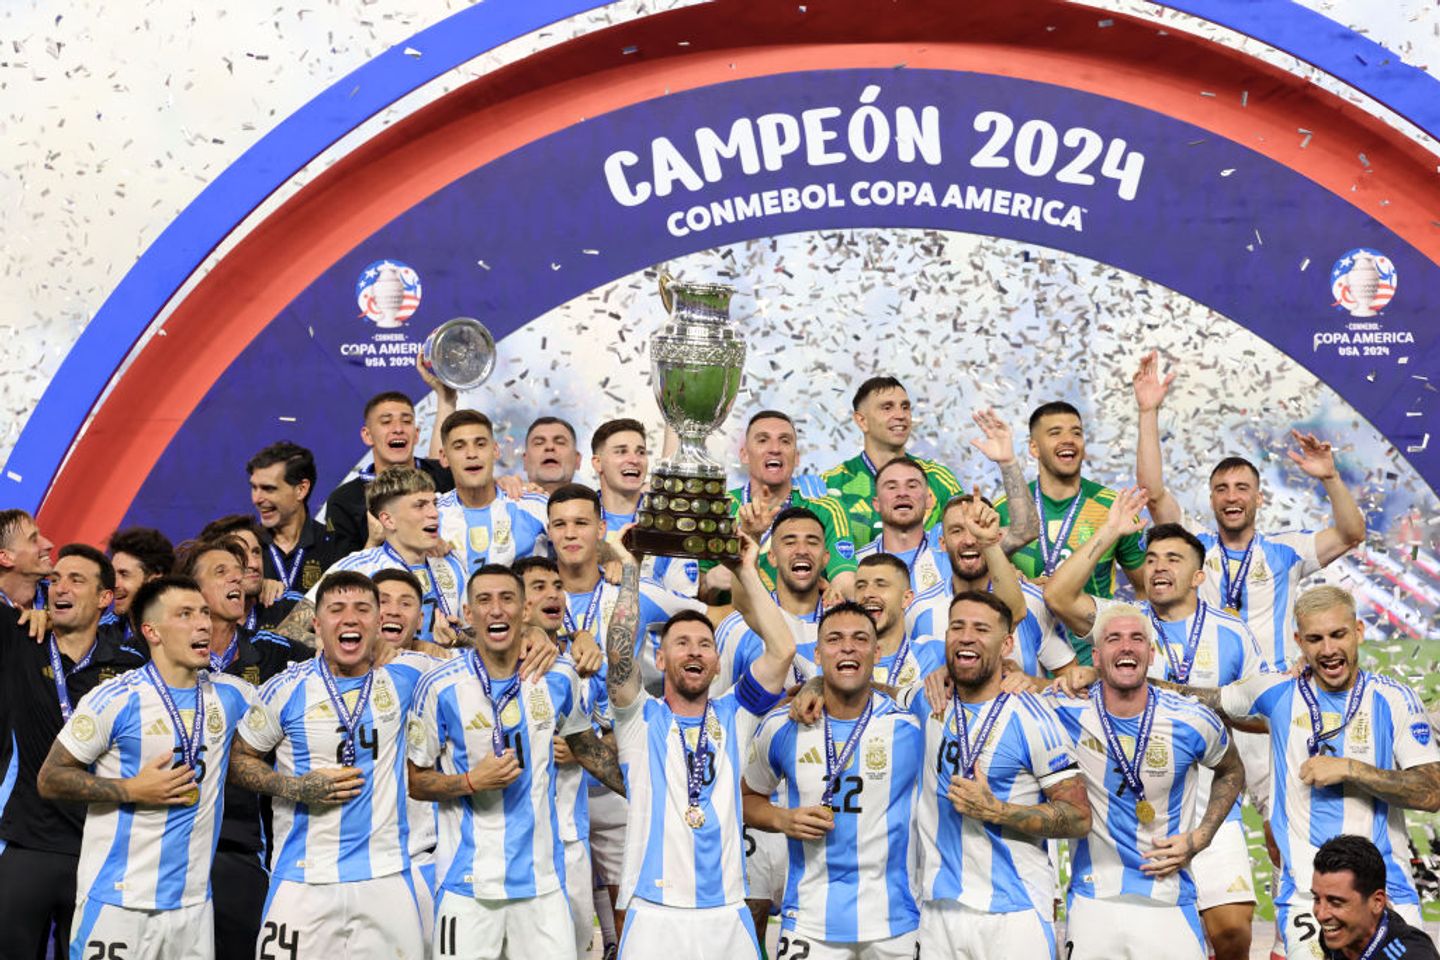 Argentina vs Colombia live updates: Messi lifts Copa America trophy in final marred by chaos outside venue